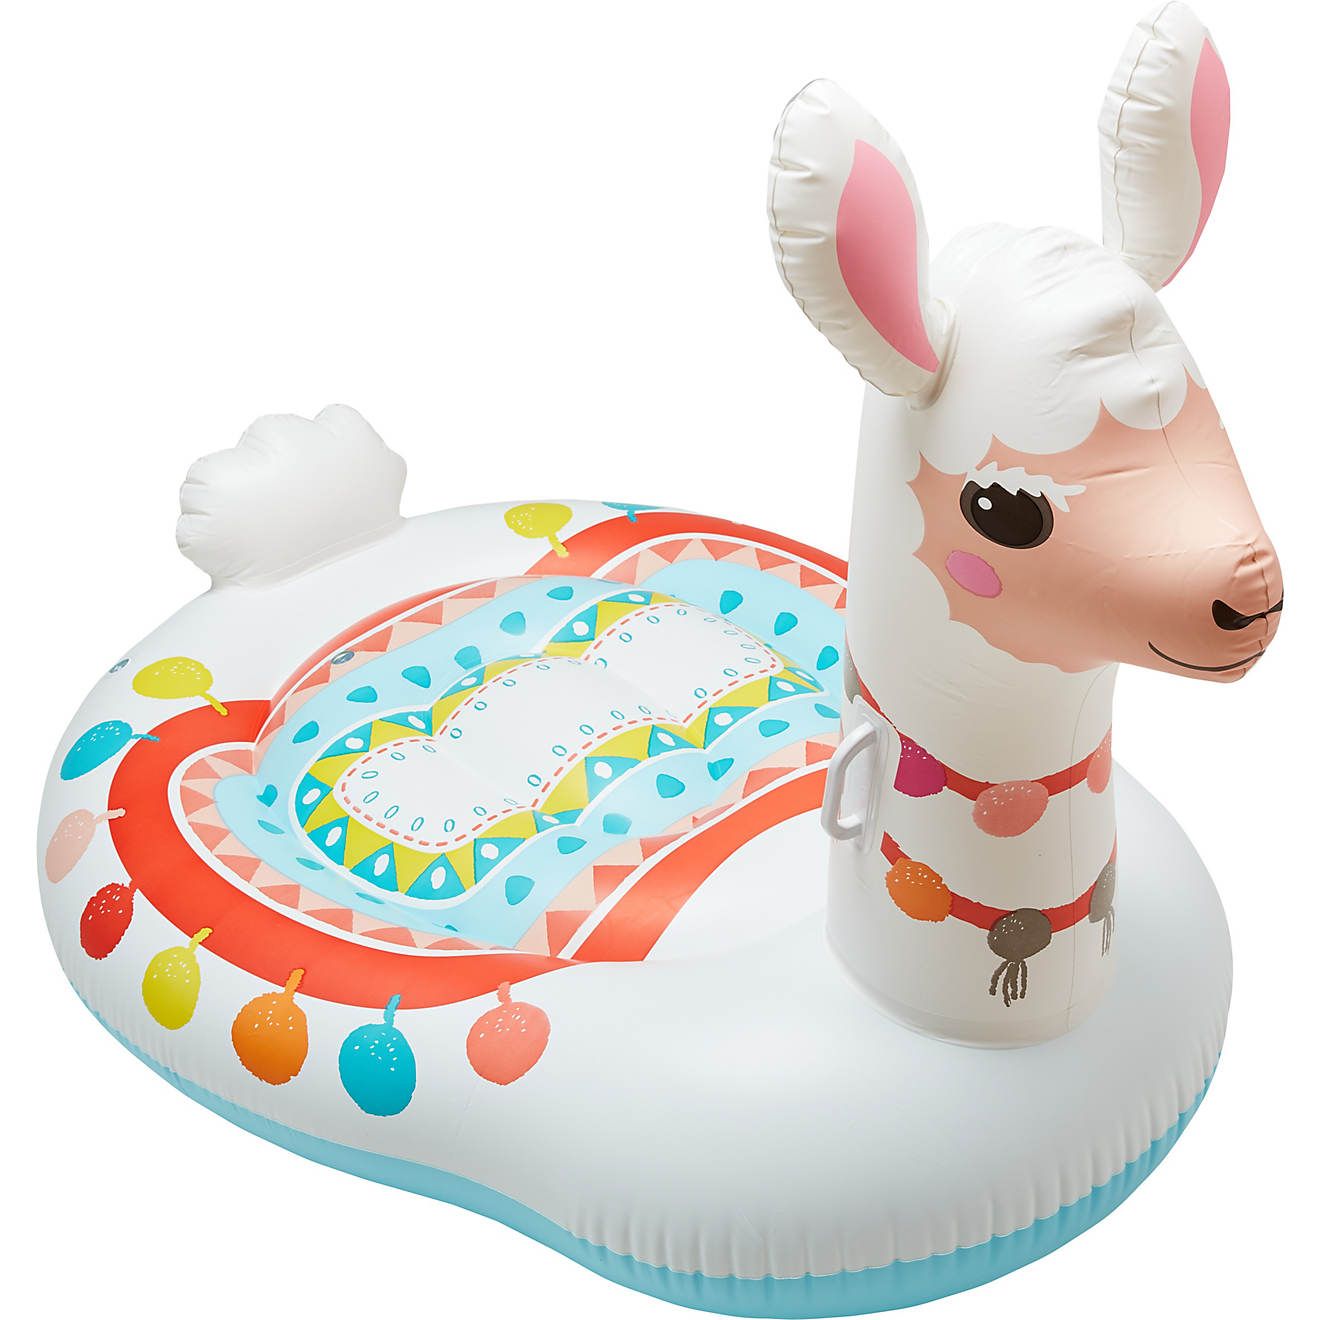 INTEX Cute Llama Ride-On Inflatable Pool Float | Academy Sports + Outdoor Affiliate